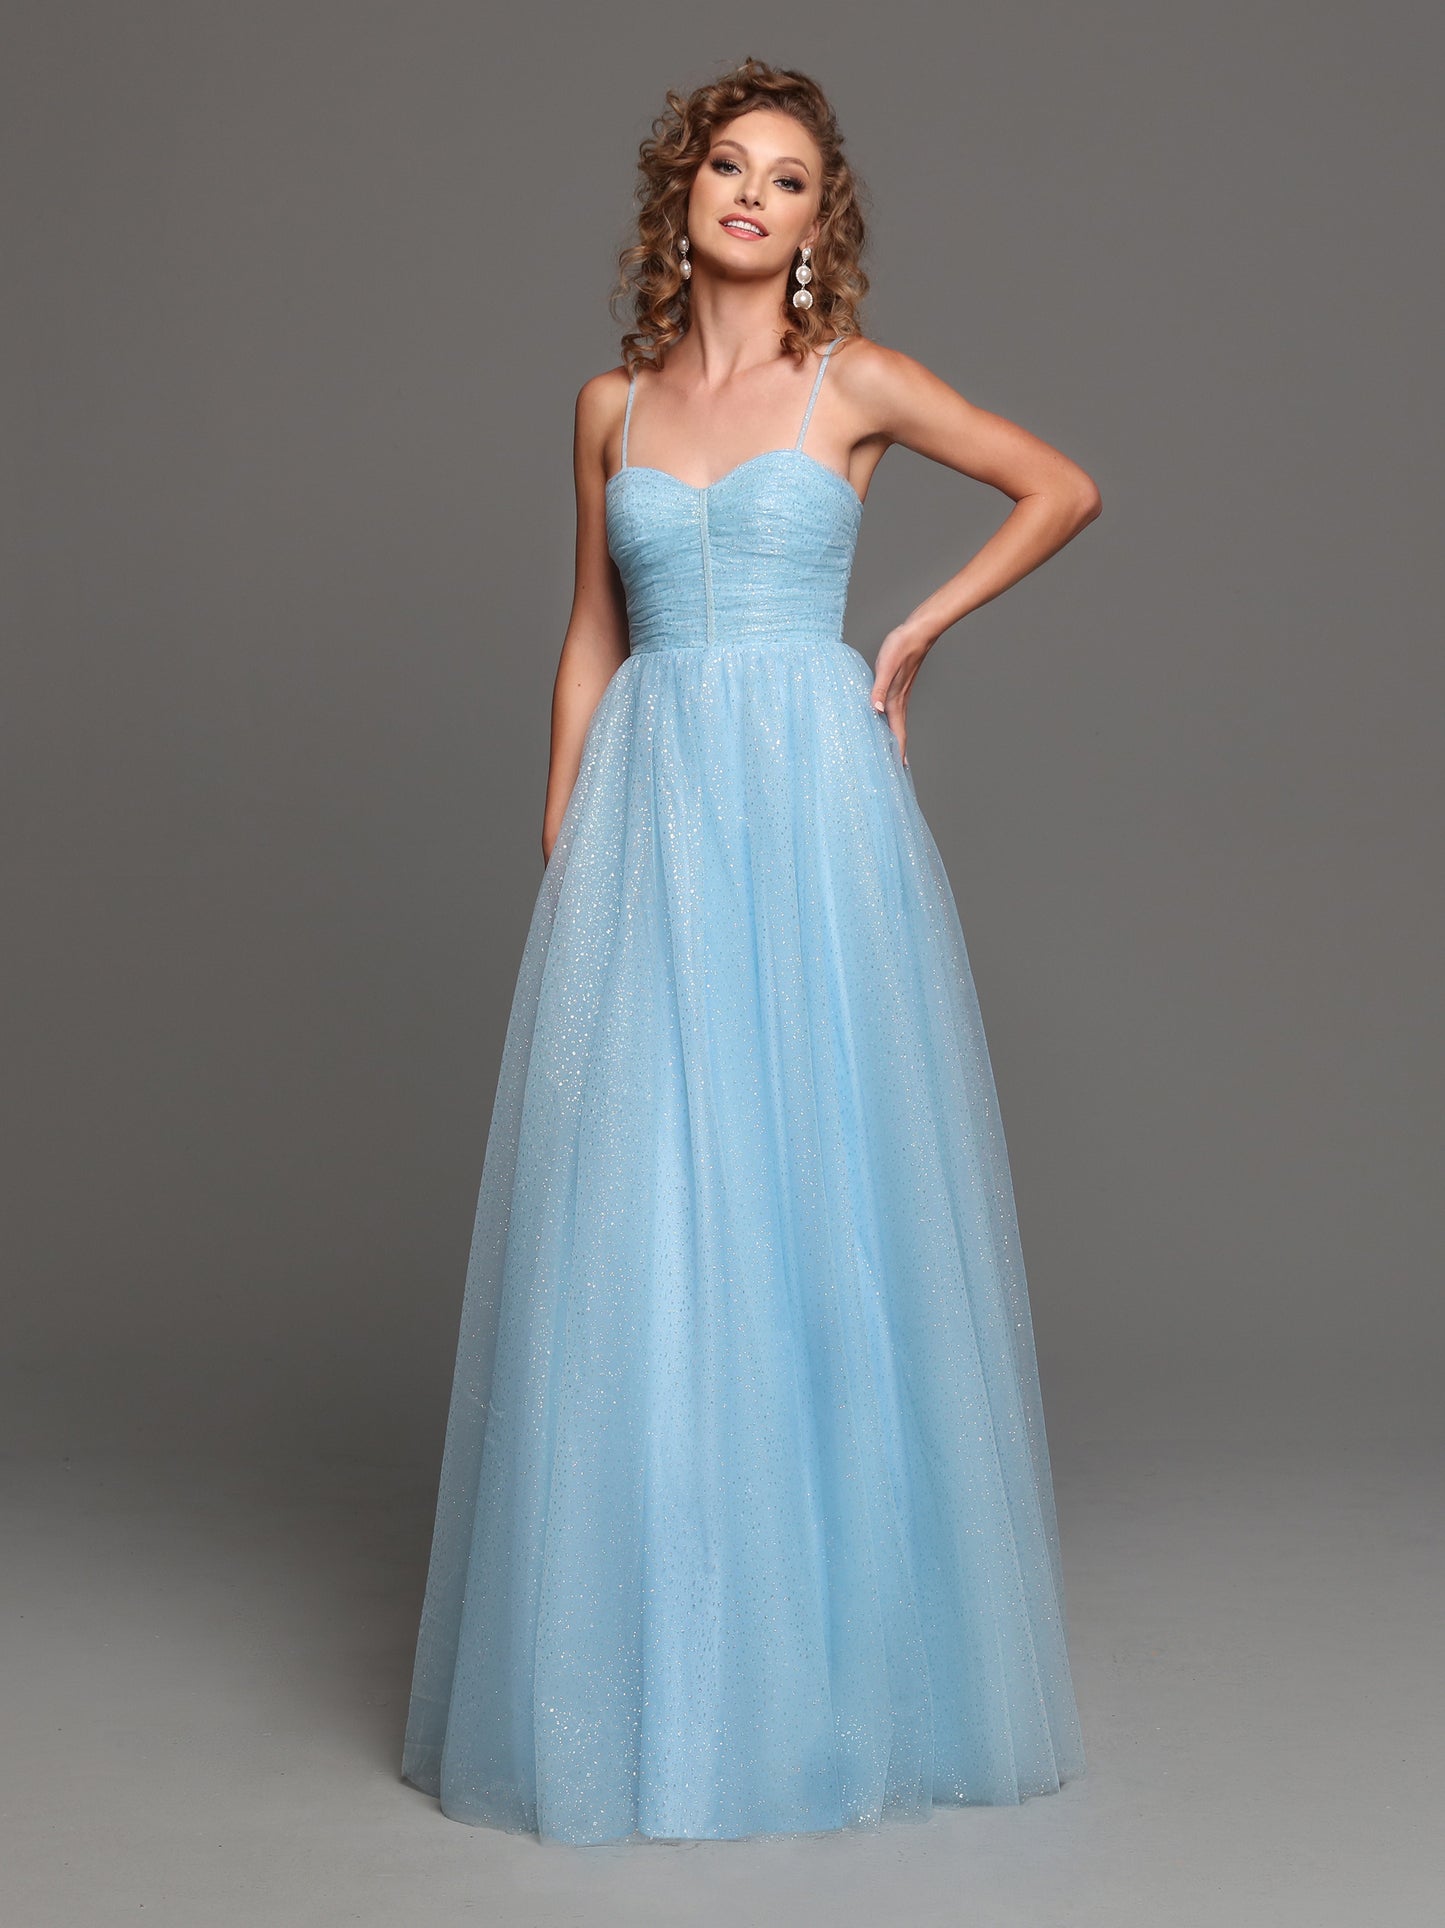 Sparkle Prom Shimmer A Line Prom Dress Pockets Bows Formal Evening Gown Ruched Bodice  Sizes: 0-20  Colors: Fuchsia, Ice Blue